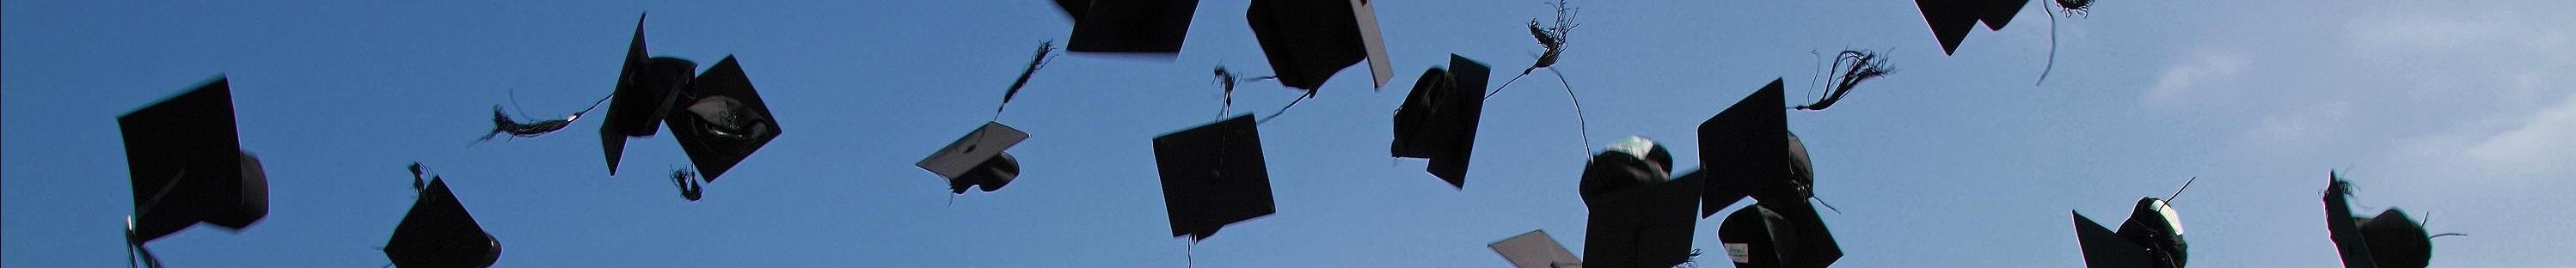 image of graduation caps being thrown into the sky